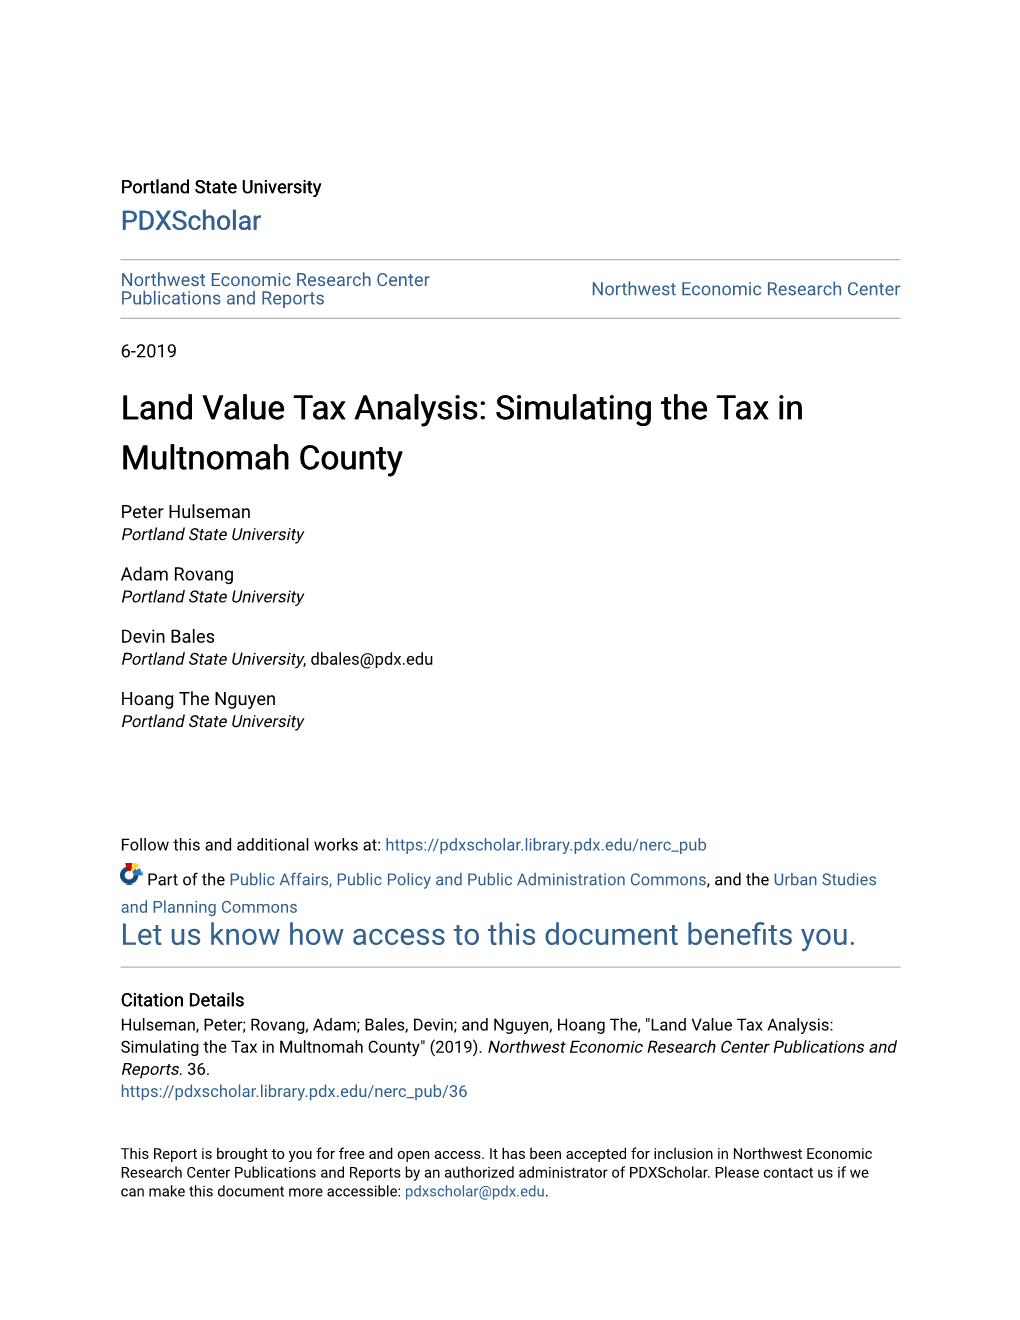 Land Value Tax Analysis: Simulating the Tax in Multnomah County